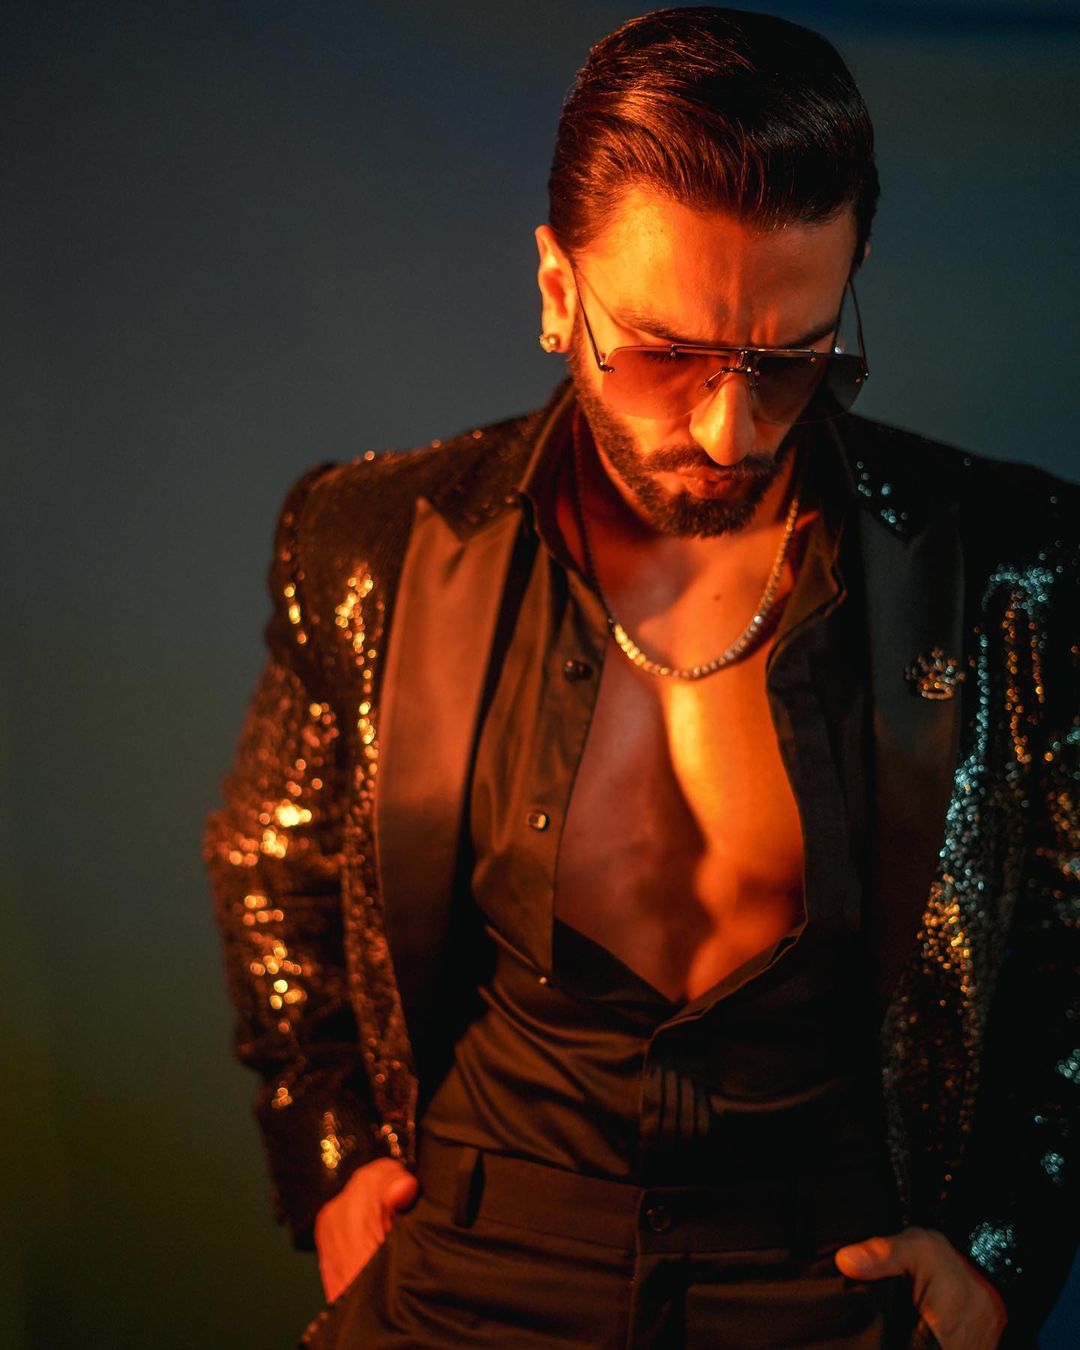 IN PICS| Ranveer Singh Ups The Glam Quotient In A Shiny Black Blazer